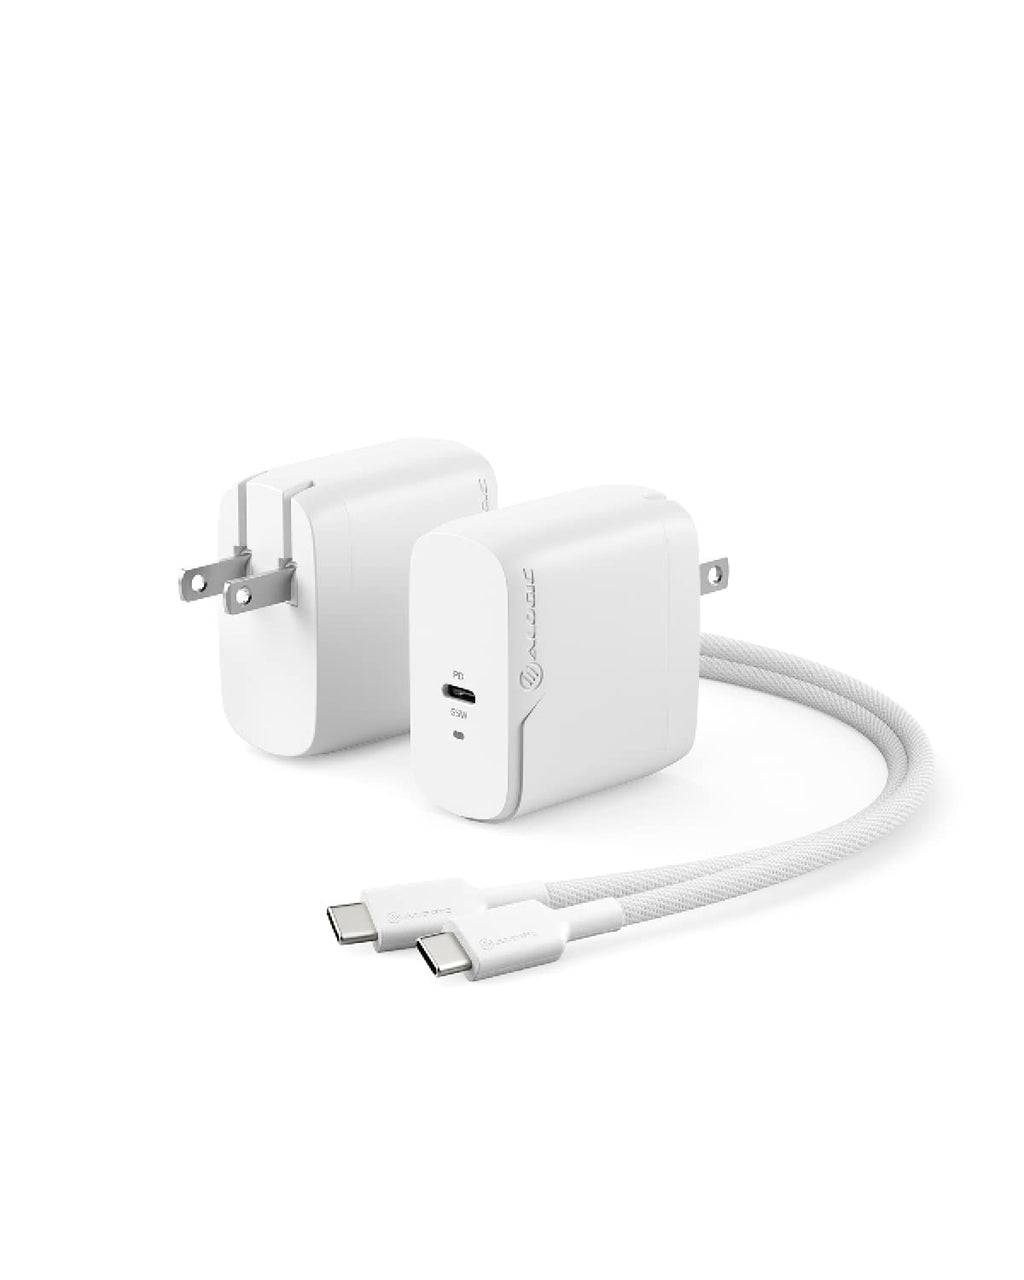  [AUSTRALIA] - ALOGIC 65W USB-C Wall Charger with GaN Fast Technology, PD Power Delivery 3.0 Charger for Fast Charging Compatible with MacBook Pro/Air M1, iPad, iPhone 13/13 Pro Mini, Galaxy, Pixel 6 pro & More.